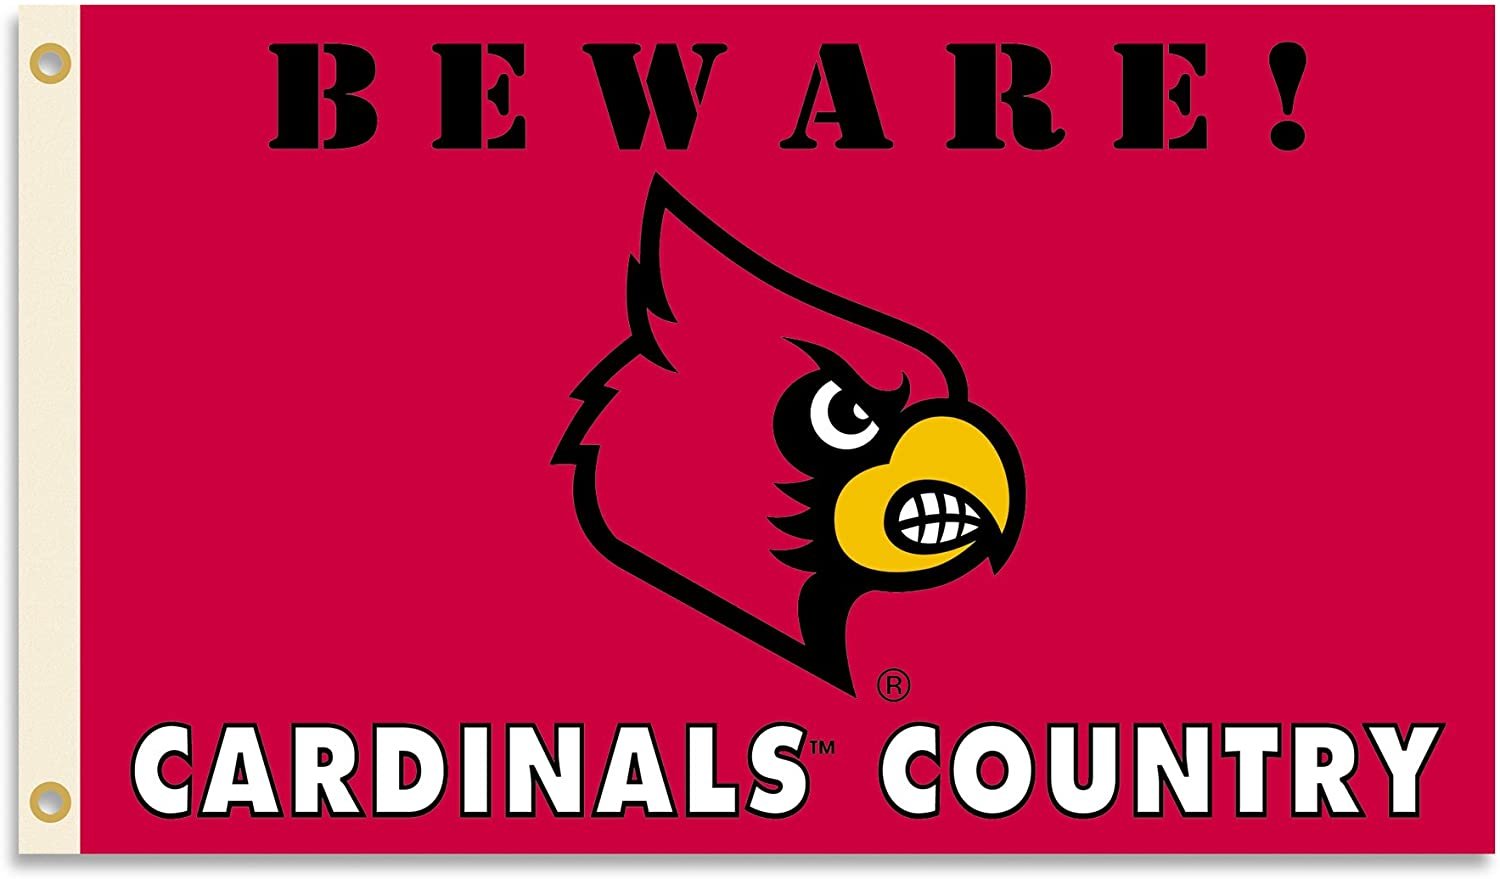 University of Louisville Cardinals Premium 3x5 Feet Flag Banner, Beware Country Design, Metal Grommets, Outdoor Use, Single Sided